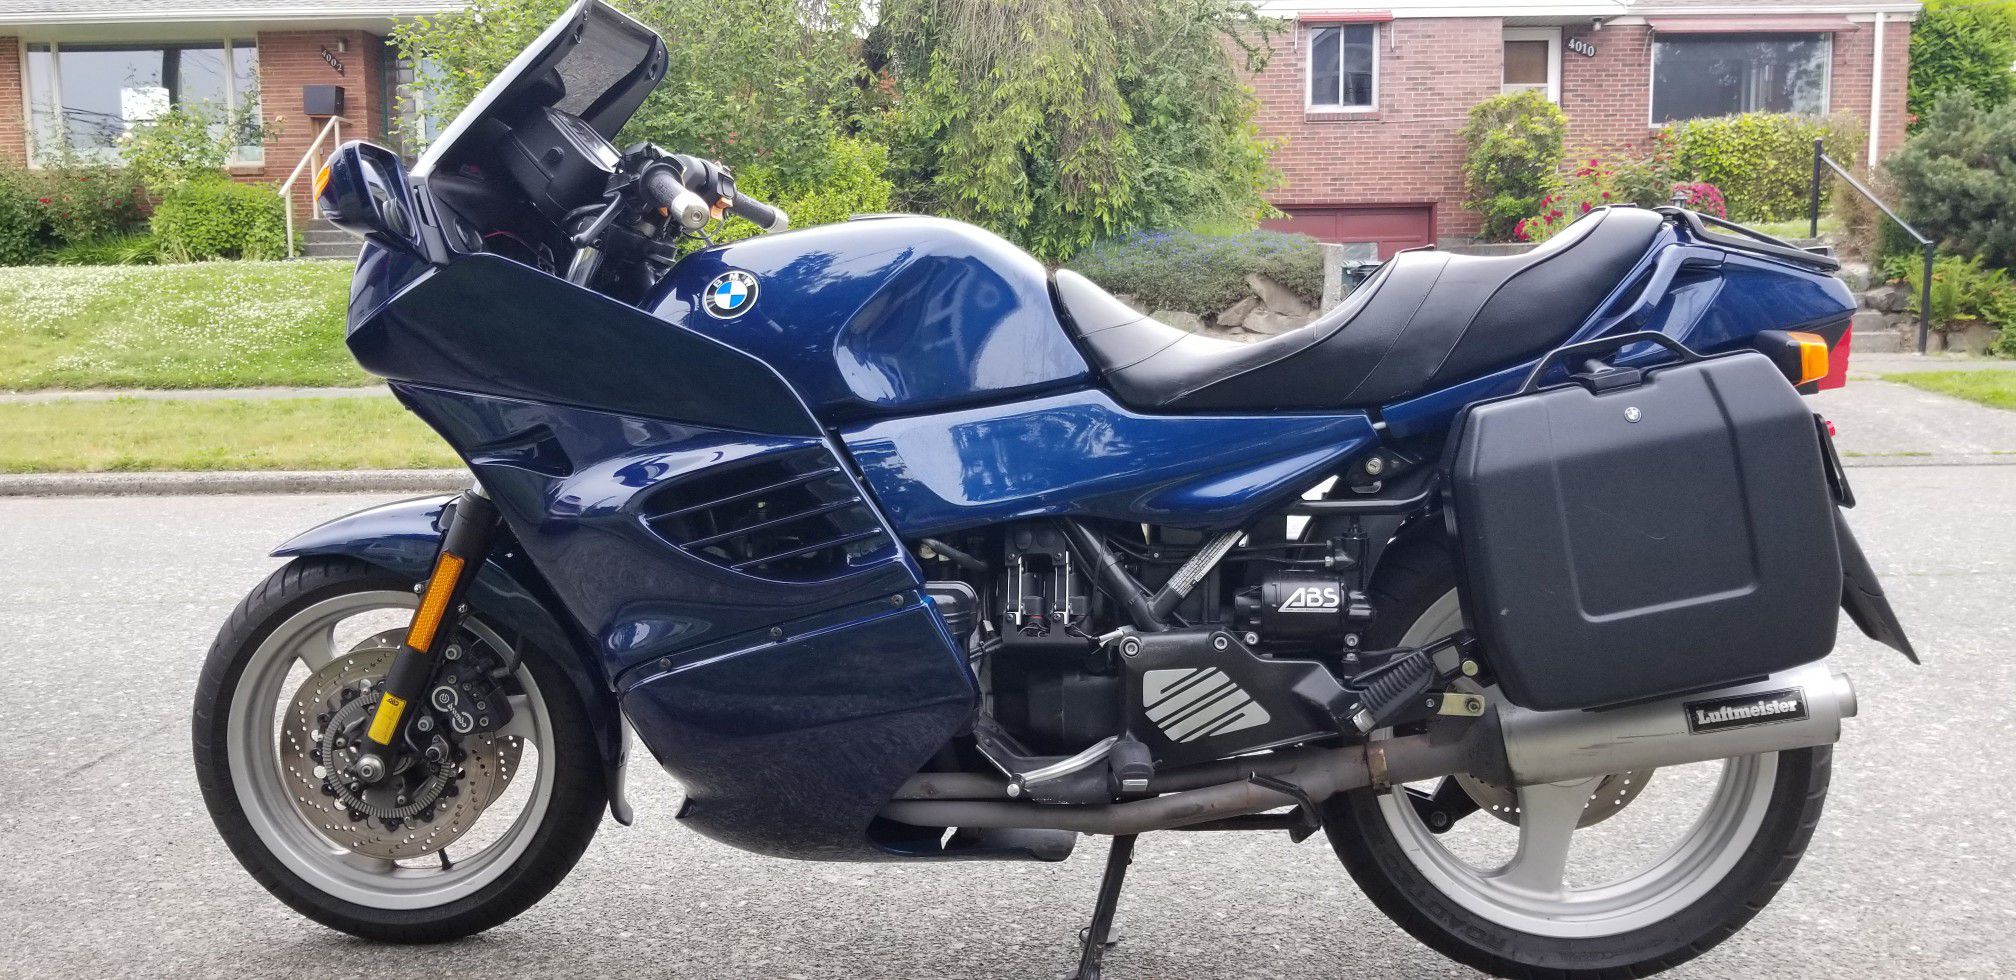 1993 BMW K1100rs Motorcycle. Heated Grips, ABS, Fog Lights